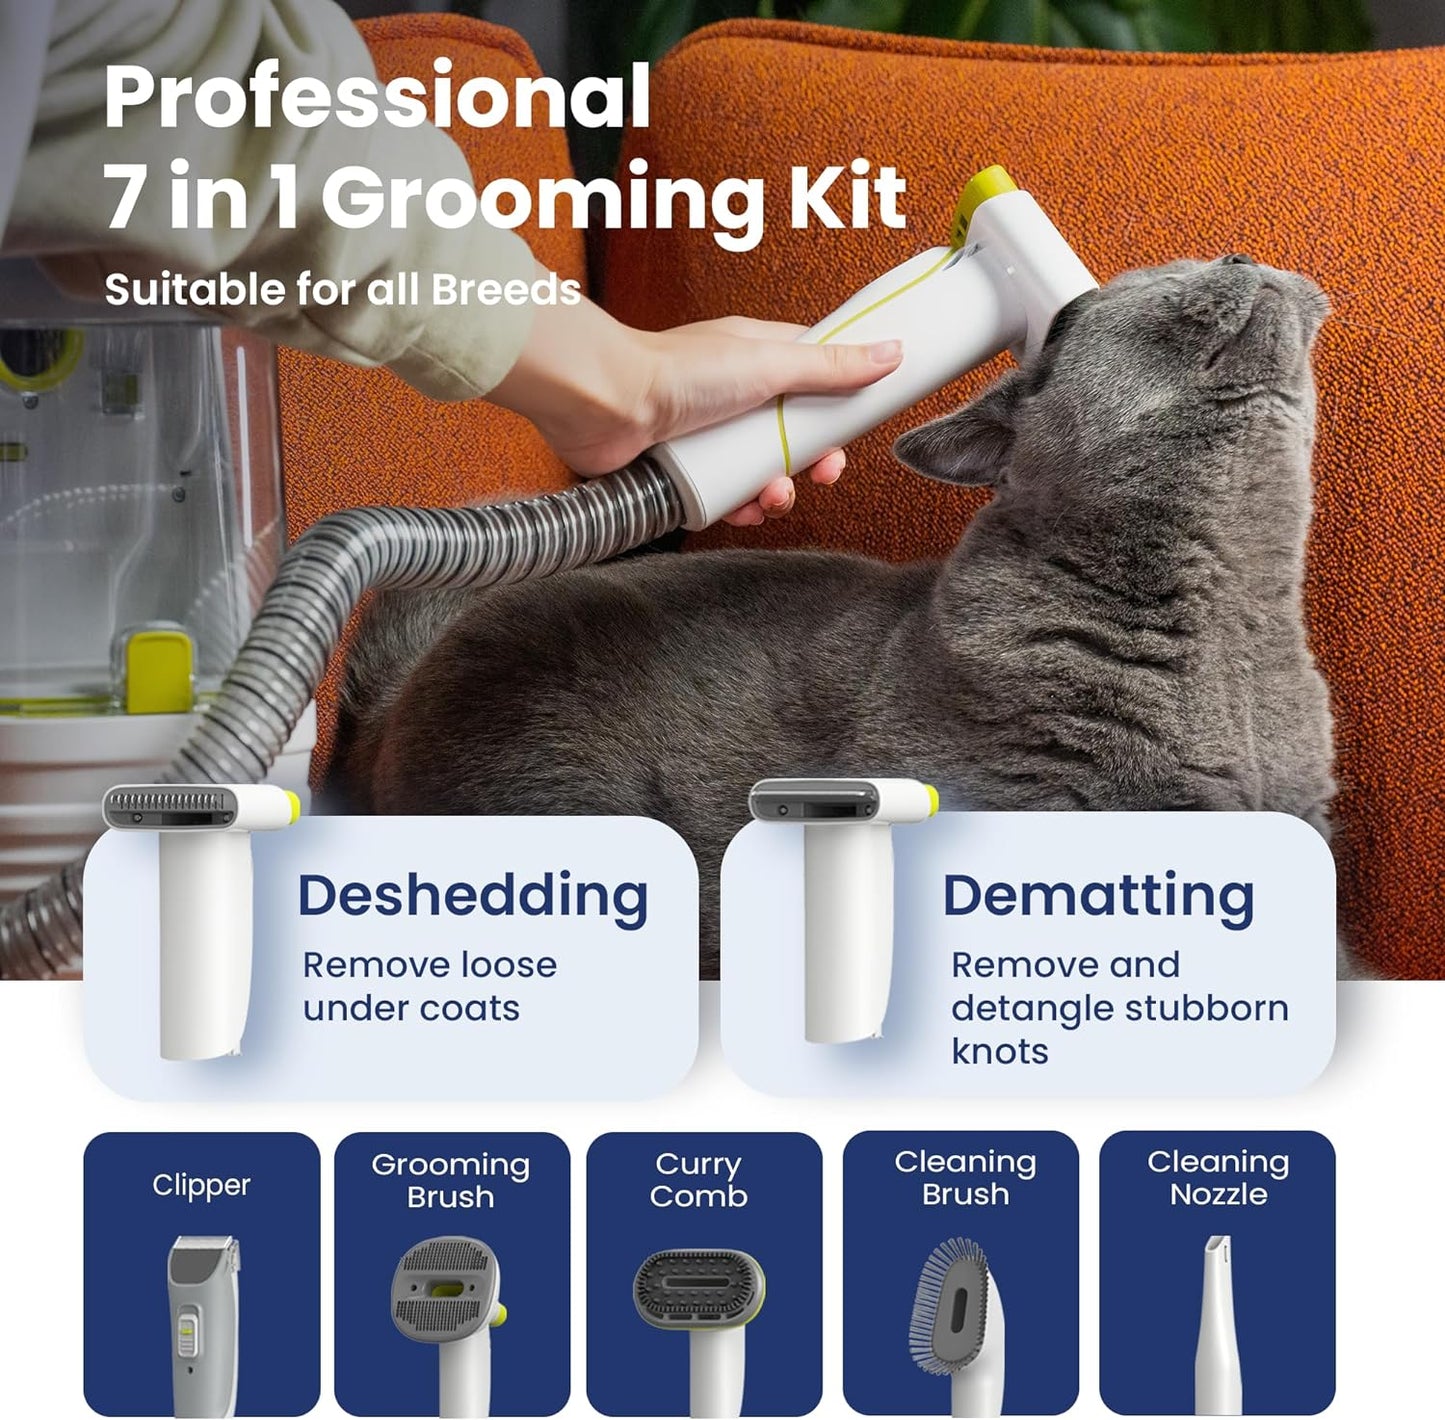 PAWSPIK GromingPro Rx Pet Vacuum Cleaner, Direct Handheld Control, 7 Pet Grooming Tools, 6 Suction Levels for Pet Hair, Large 2.2L Dust Bin, for Home Clea